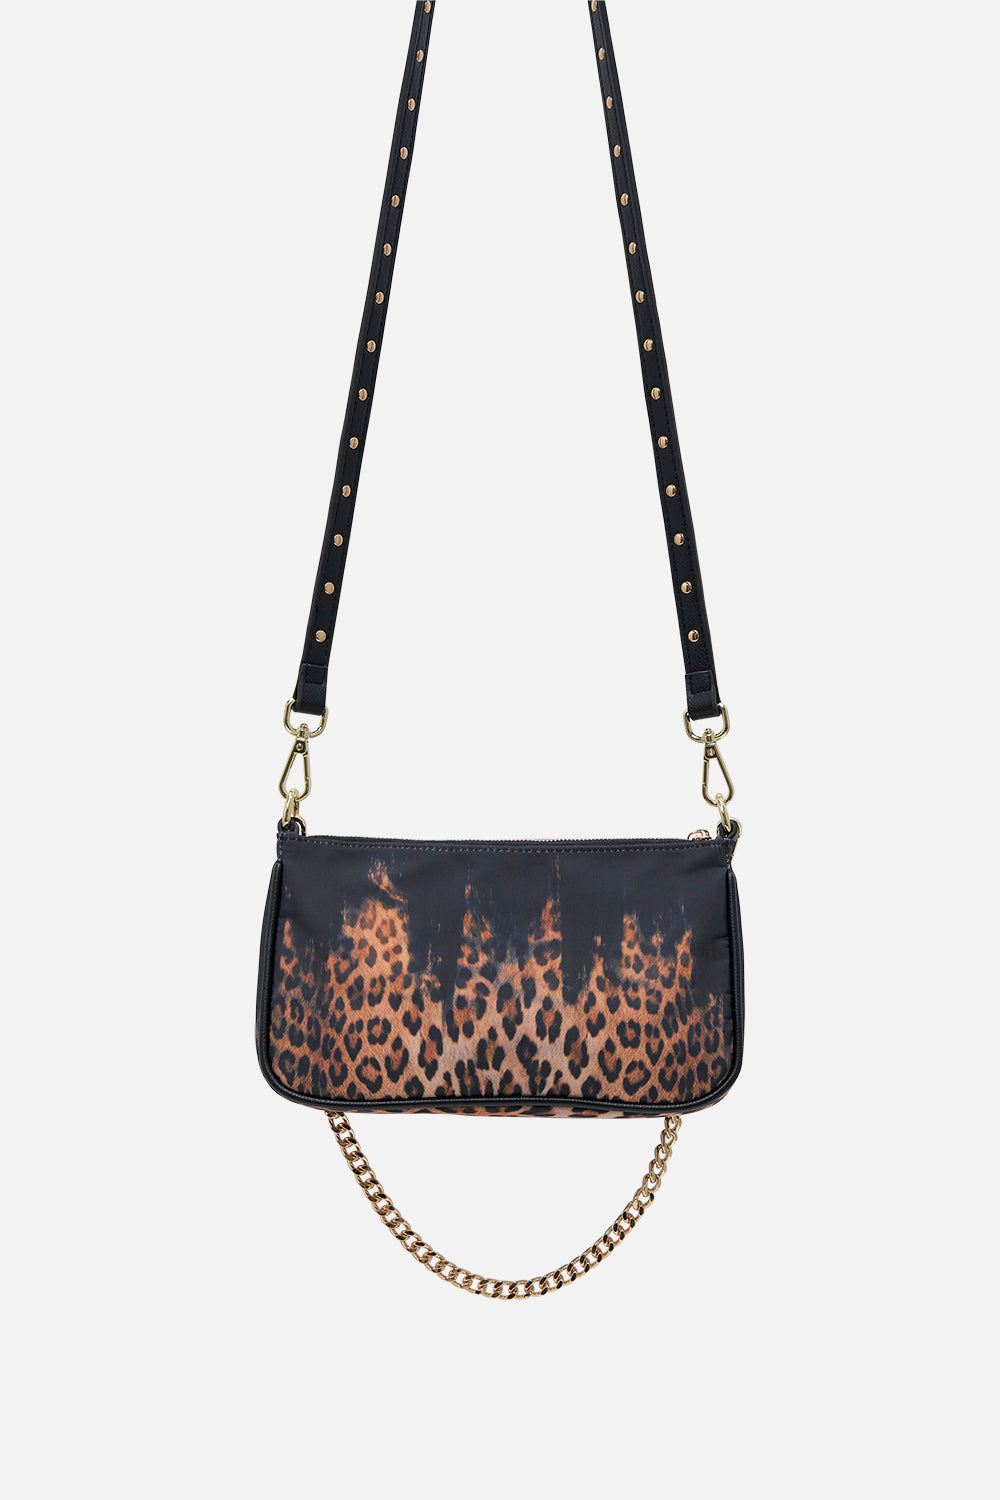 LOUIS VUITTON MULTI POCHETTE WILD AT HEART BLACK (Smaller Pouch Not  Included)